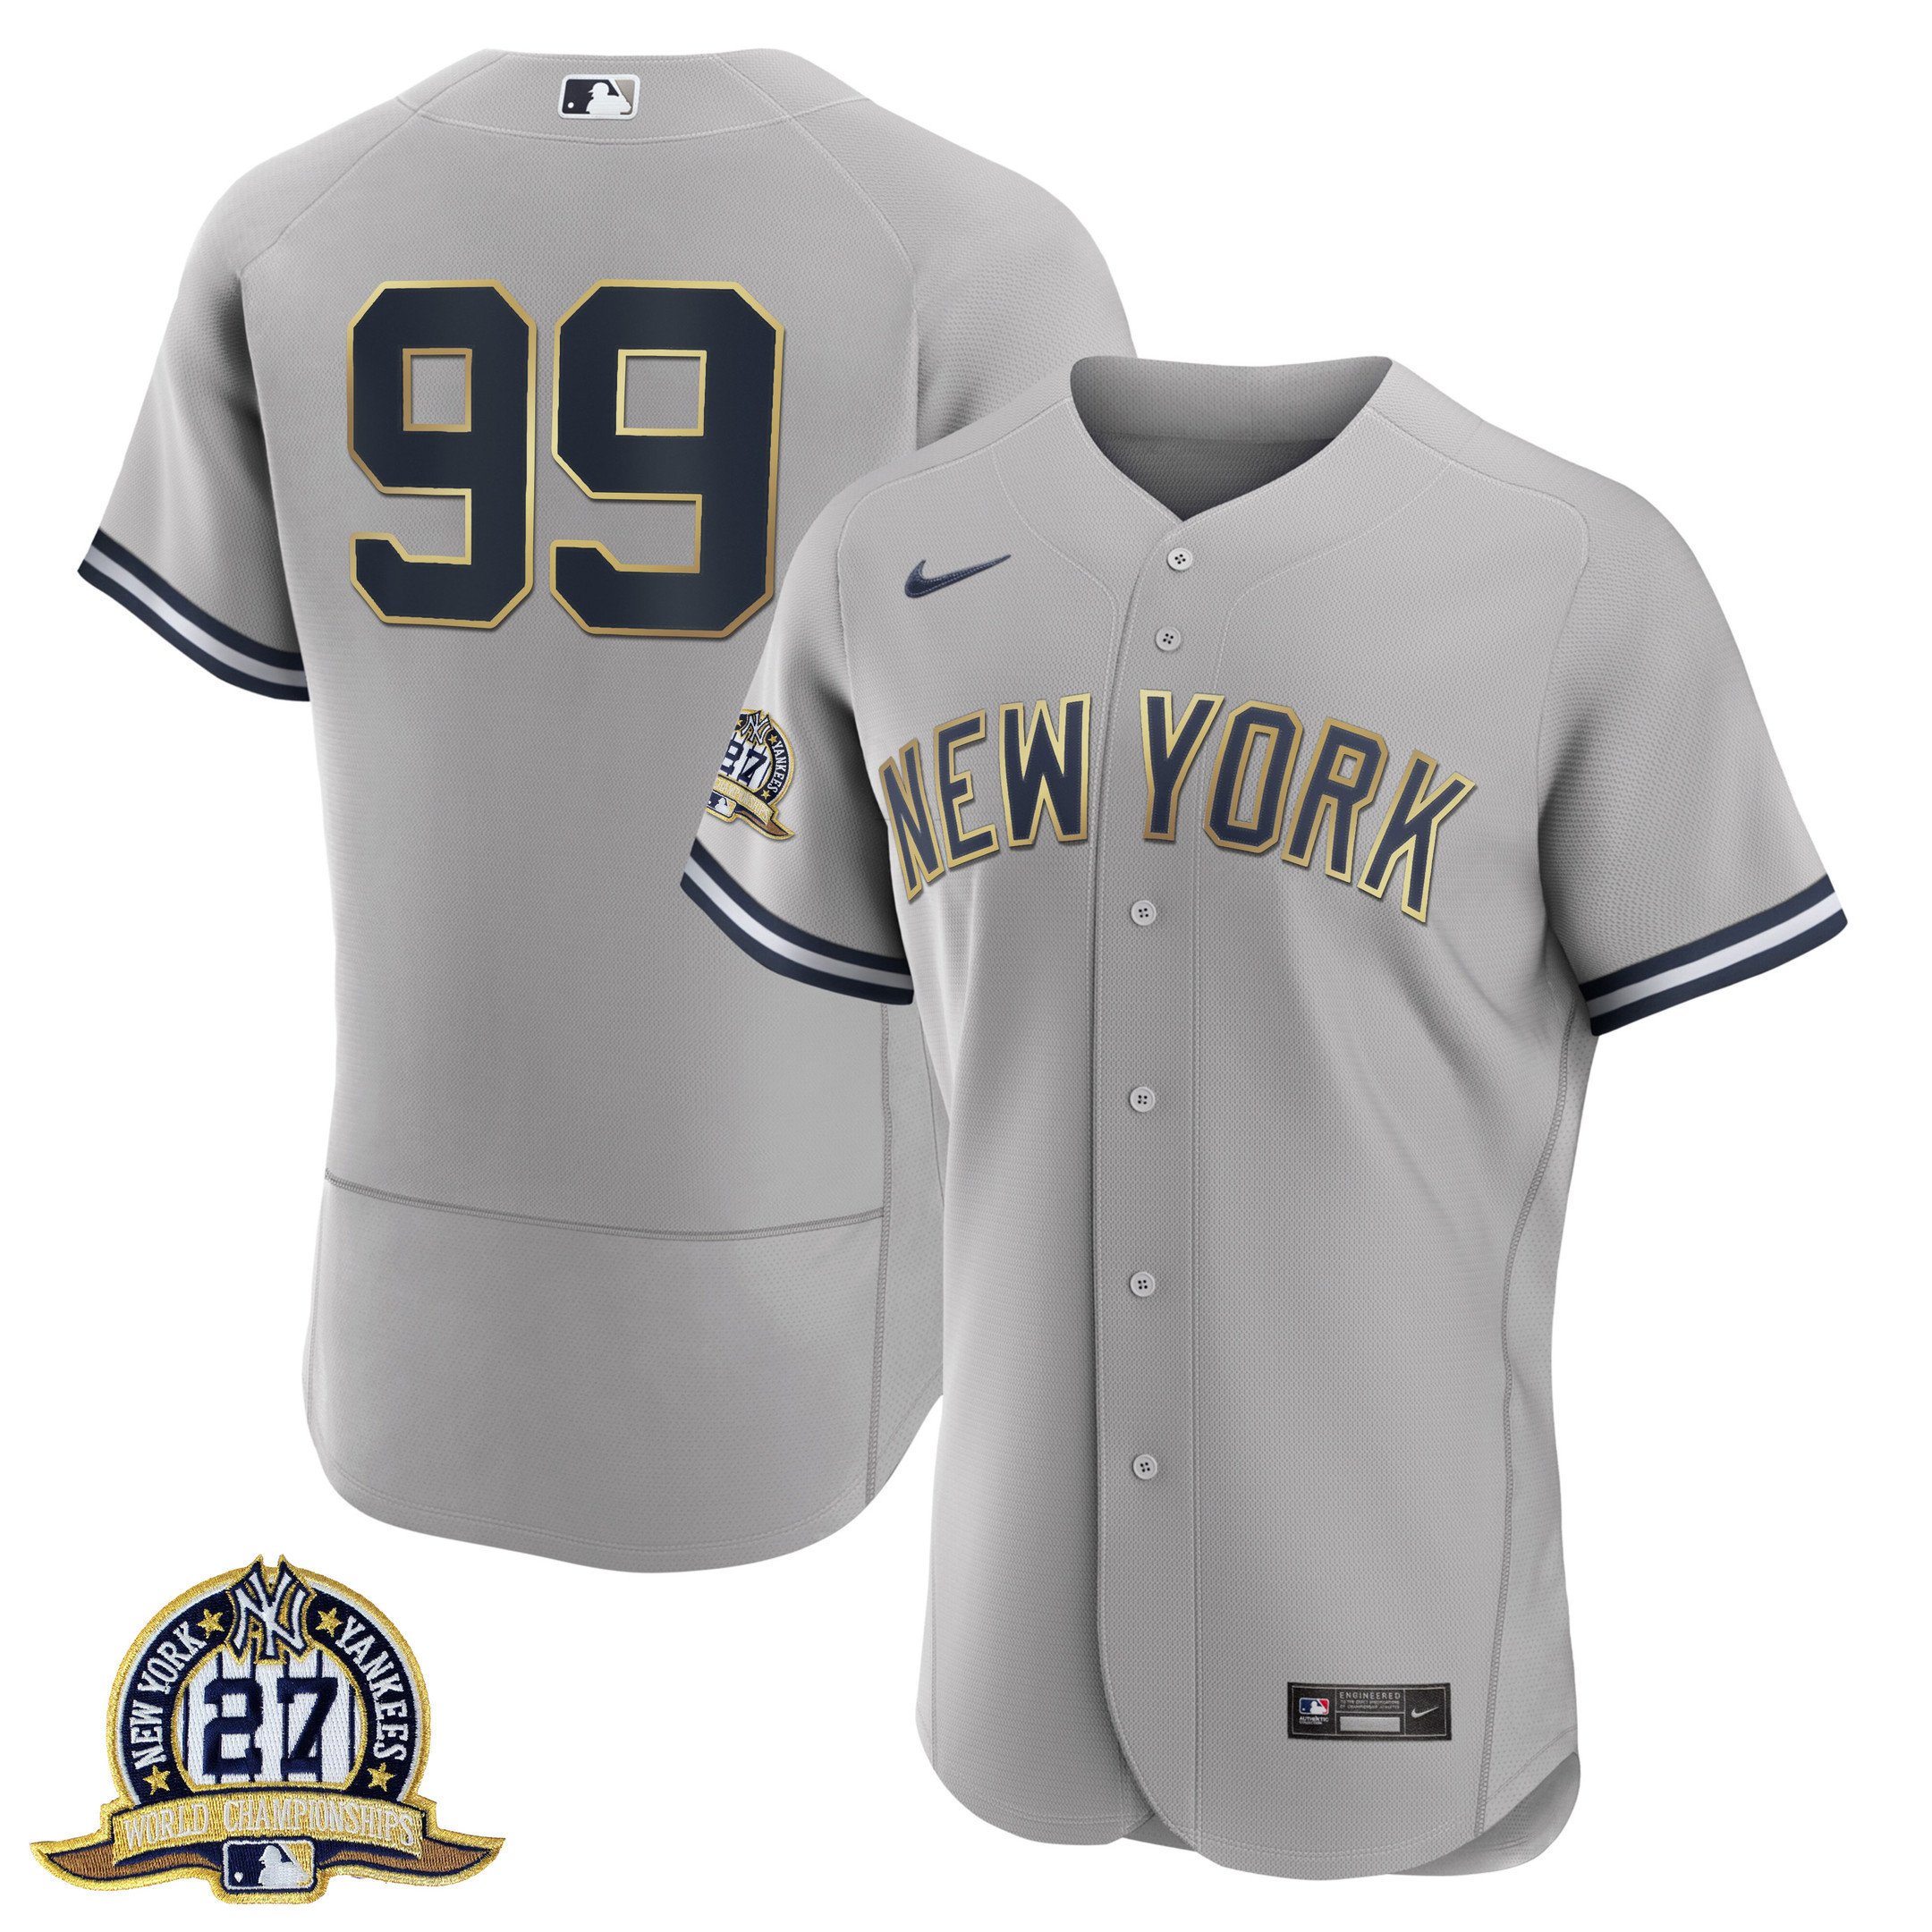 aaron judge jersey youth xl